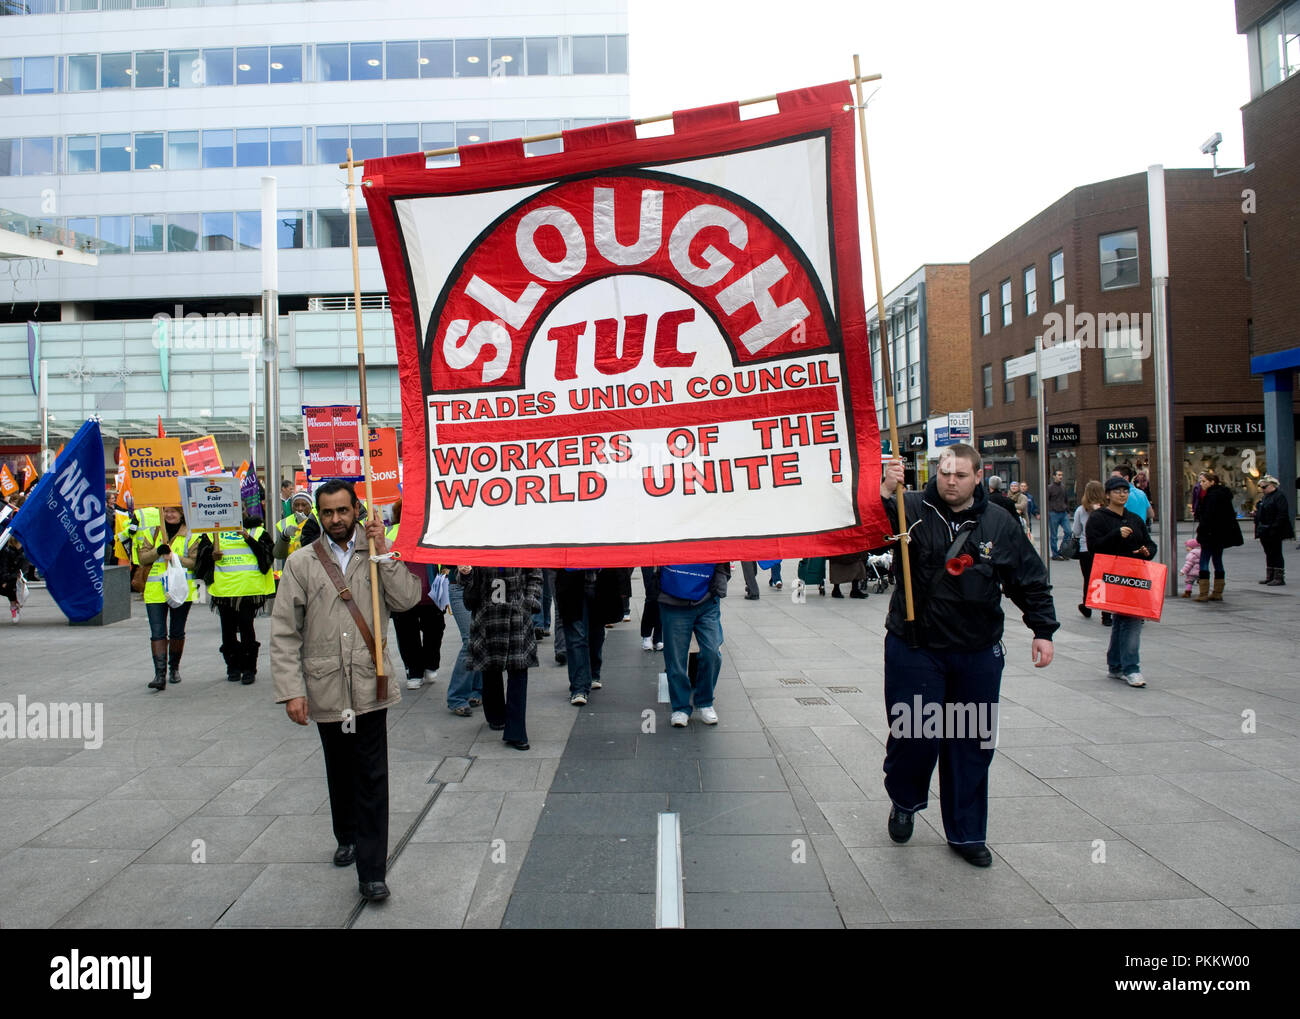 Public sector workers strike on the Town Square in Slough, Berks, England, part of a national one day strike against changes to public sector pensions Stock Photo